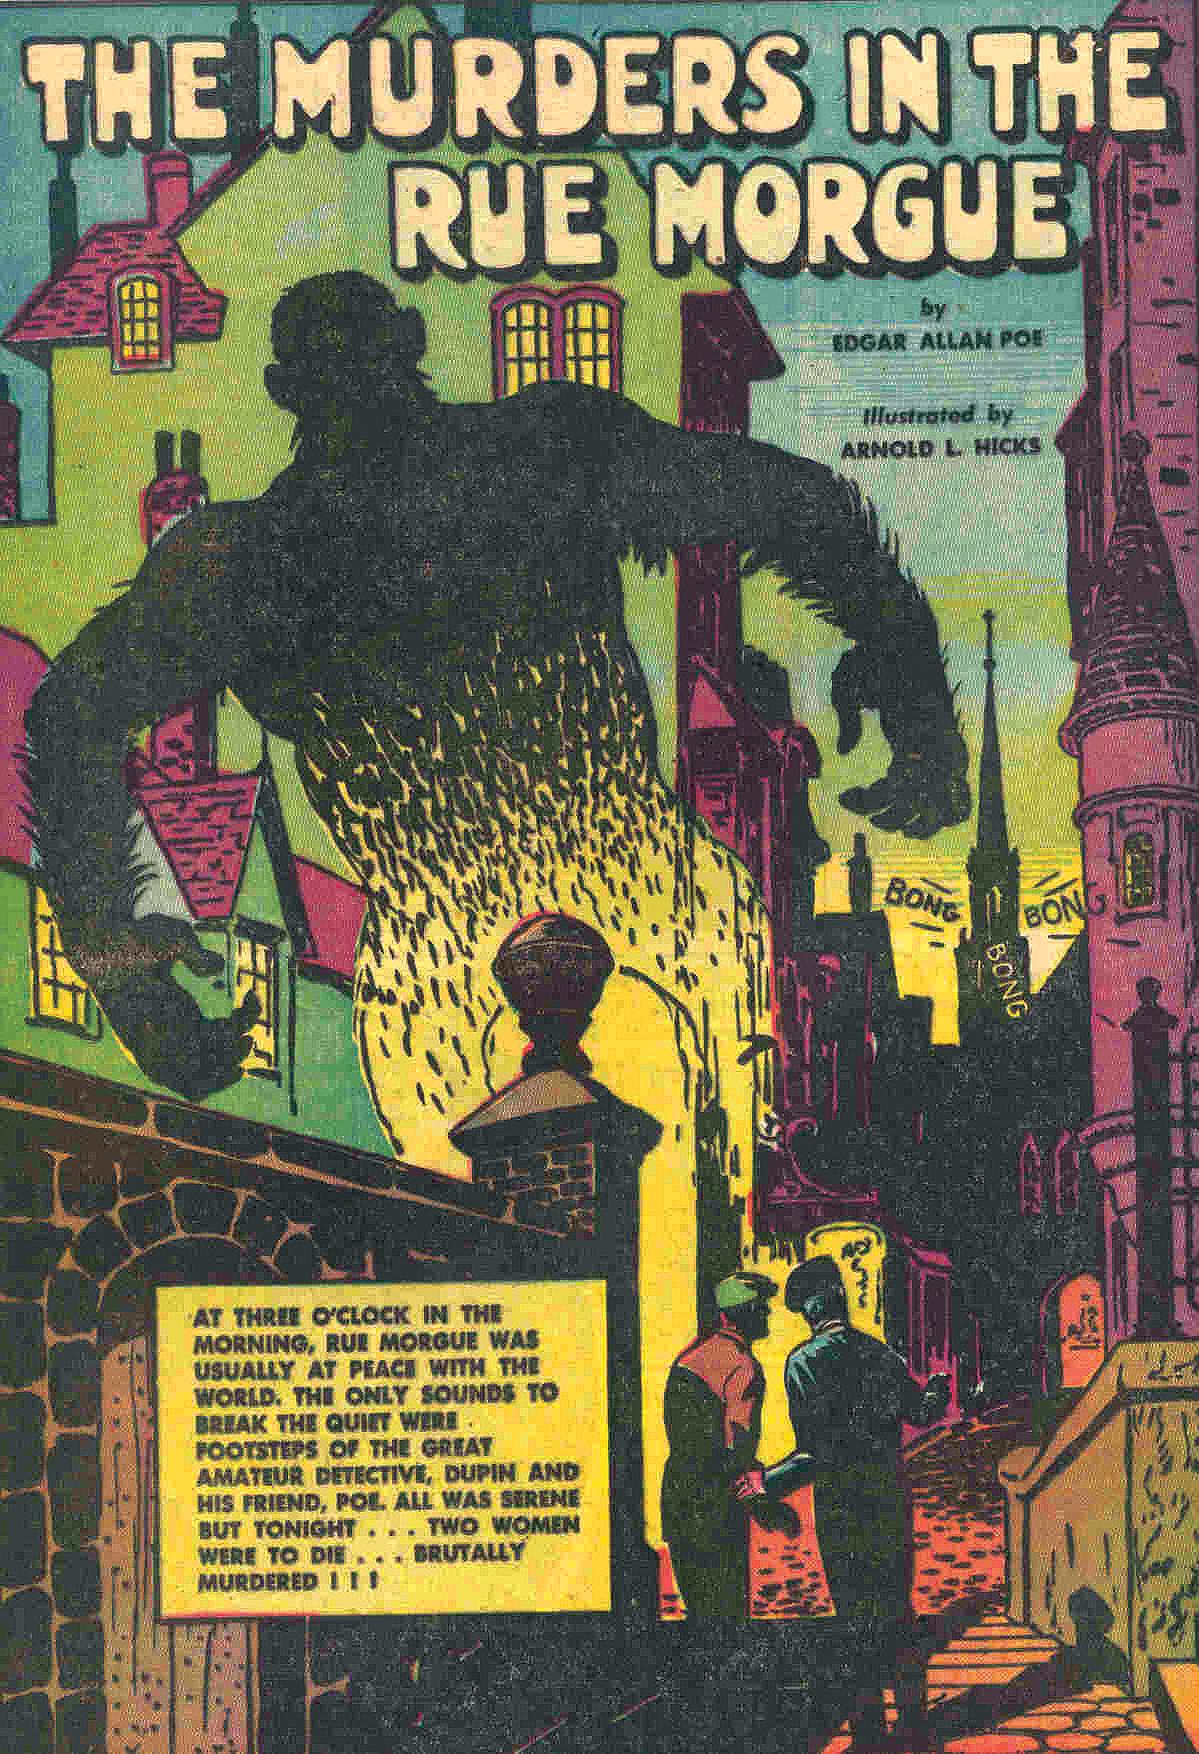 Comic book cover of a monster looming over some buildings